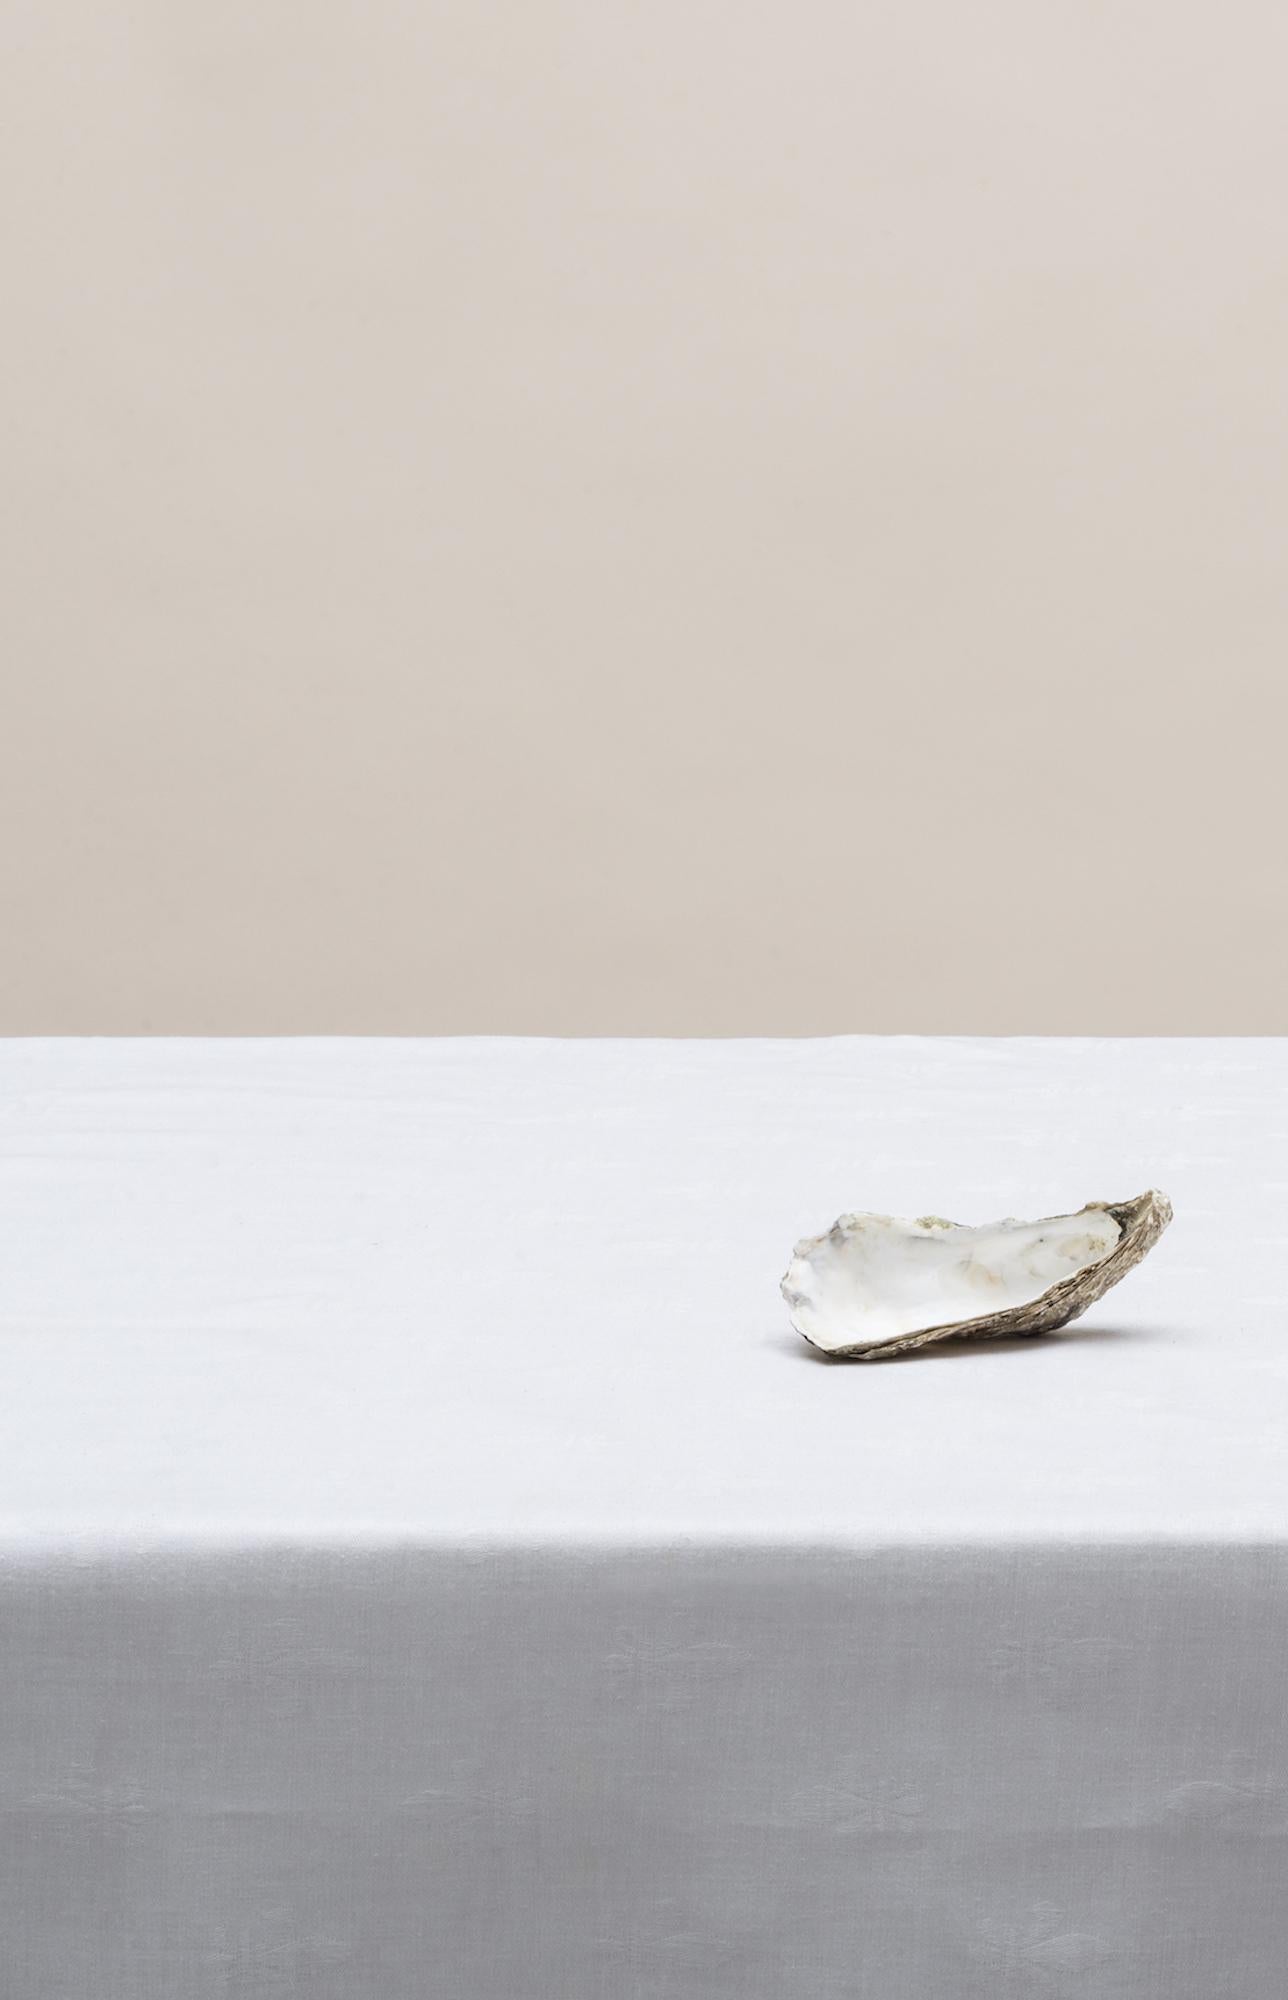 Untitled (#14-5) by Pawel Żak - Contemporary studio photography, oysters, shells For Sale 3